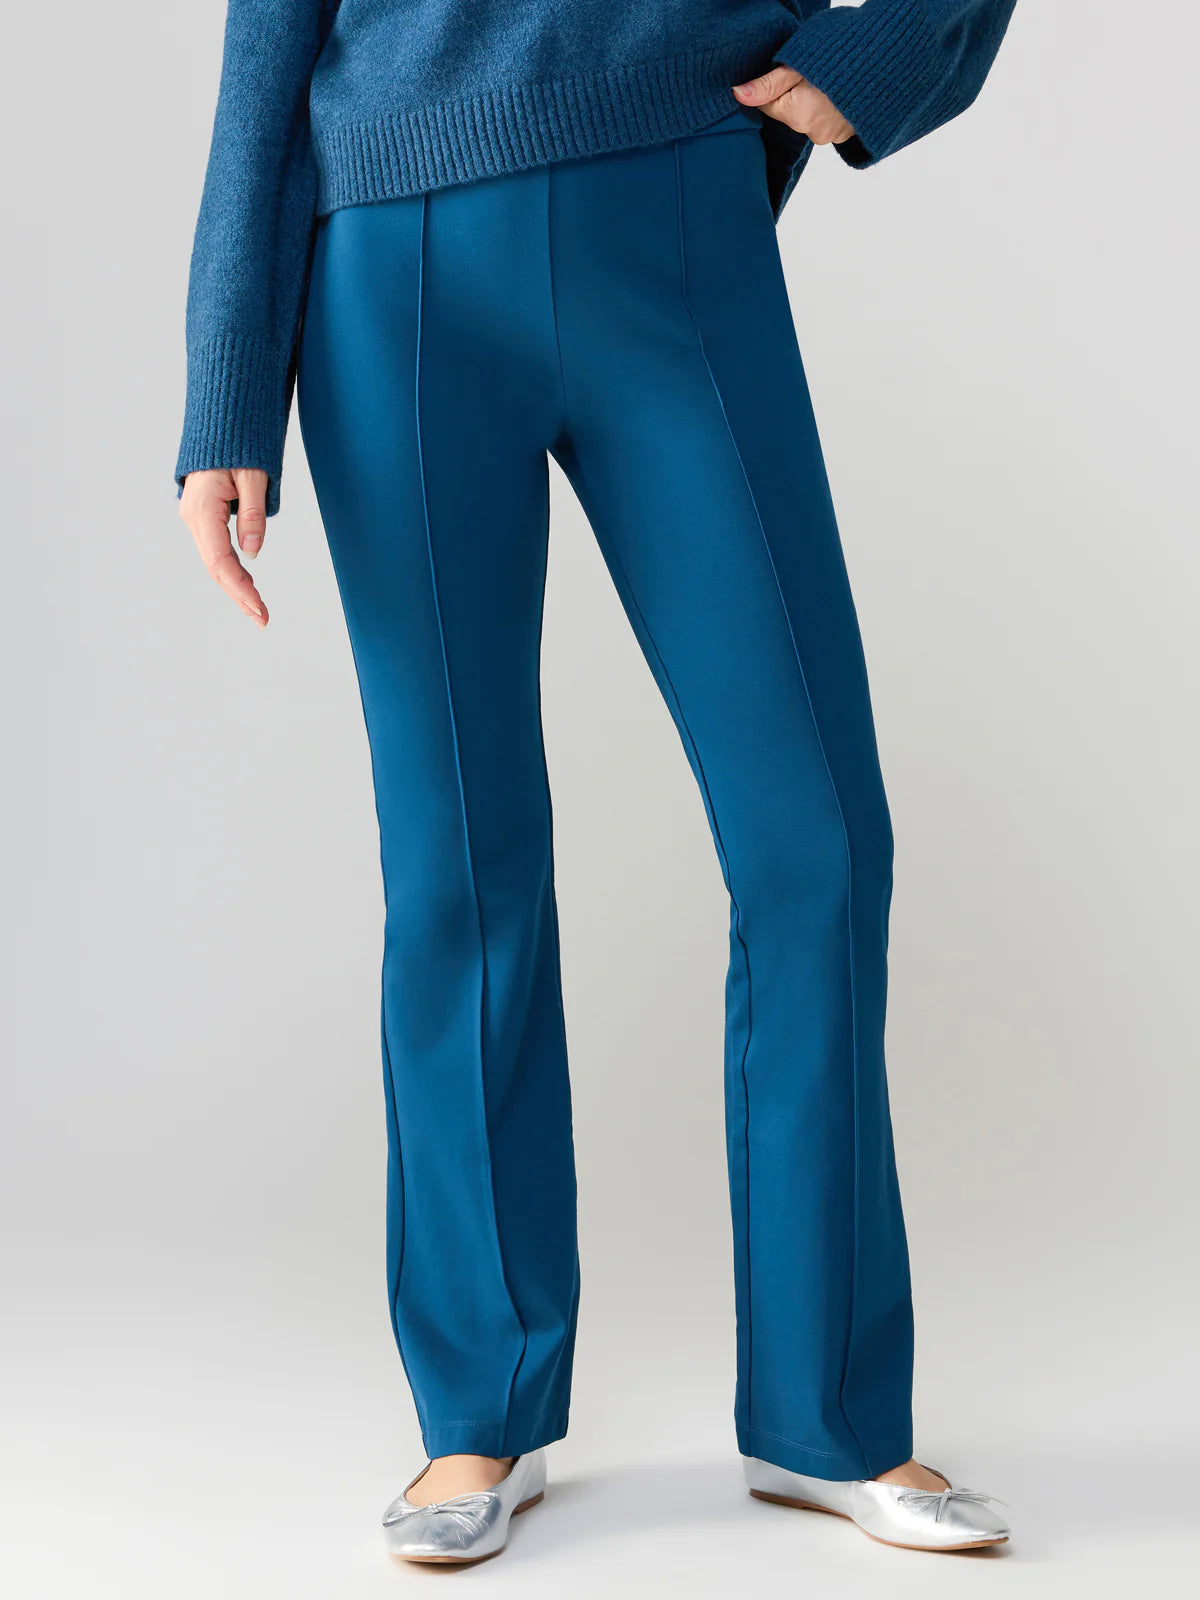 blue jewel toned fitted flare pants with front pin tuck